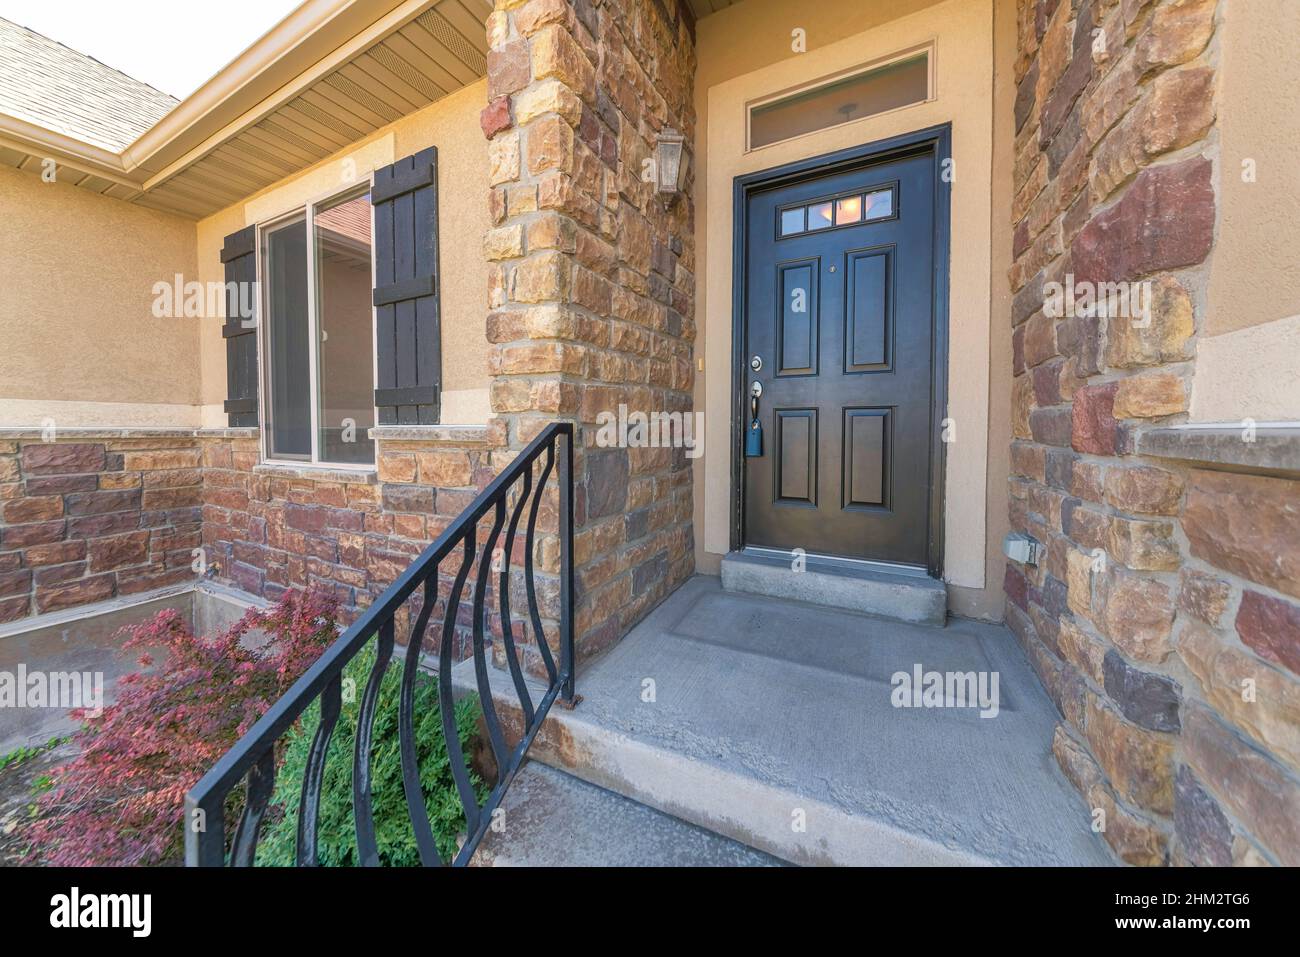 Facade of a house with brown stone veneer exterior and shrubs at the front Stock Photo